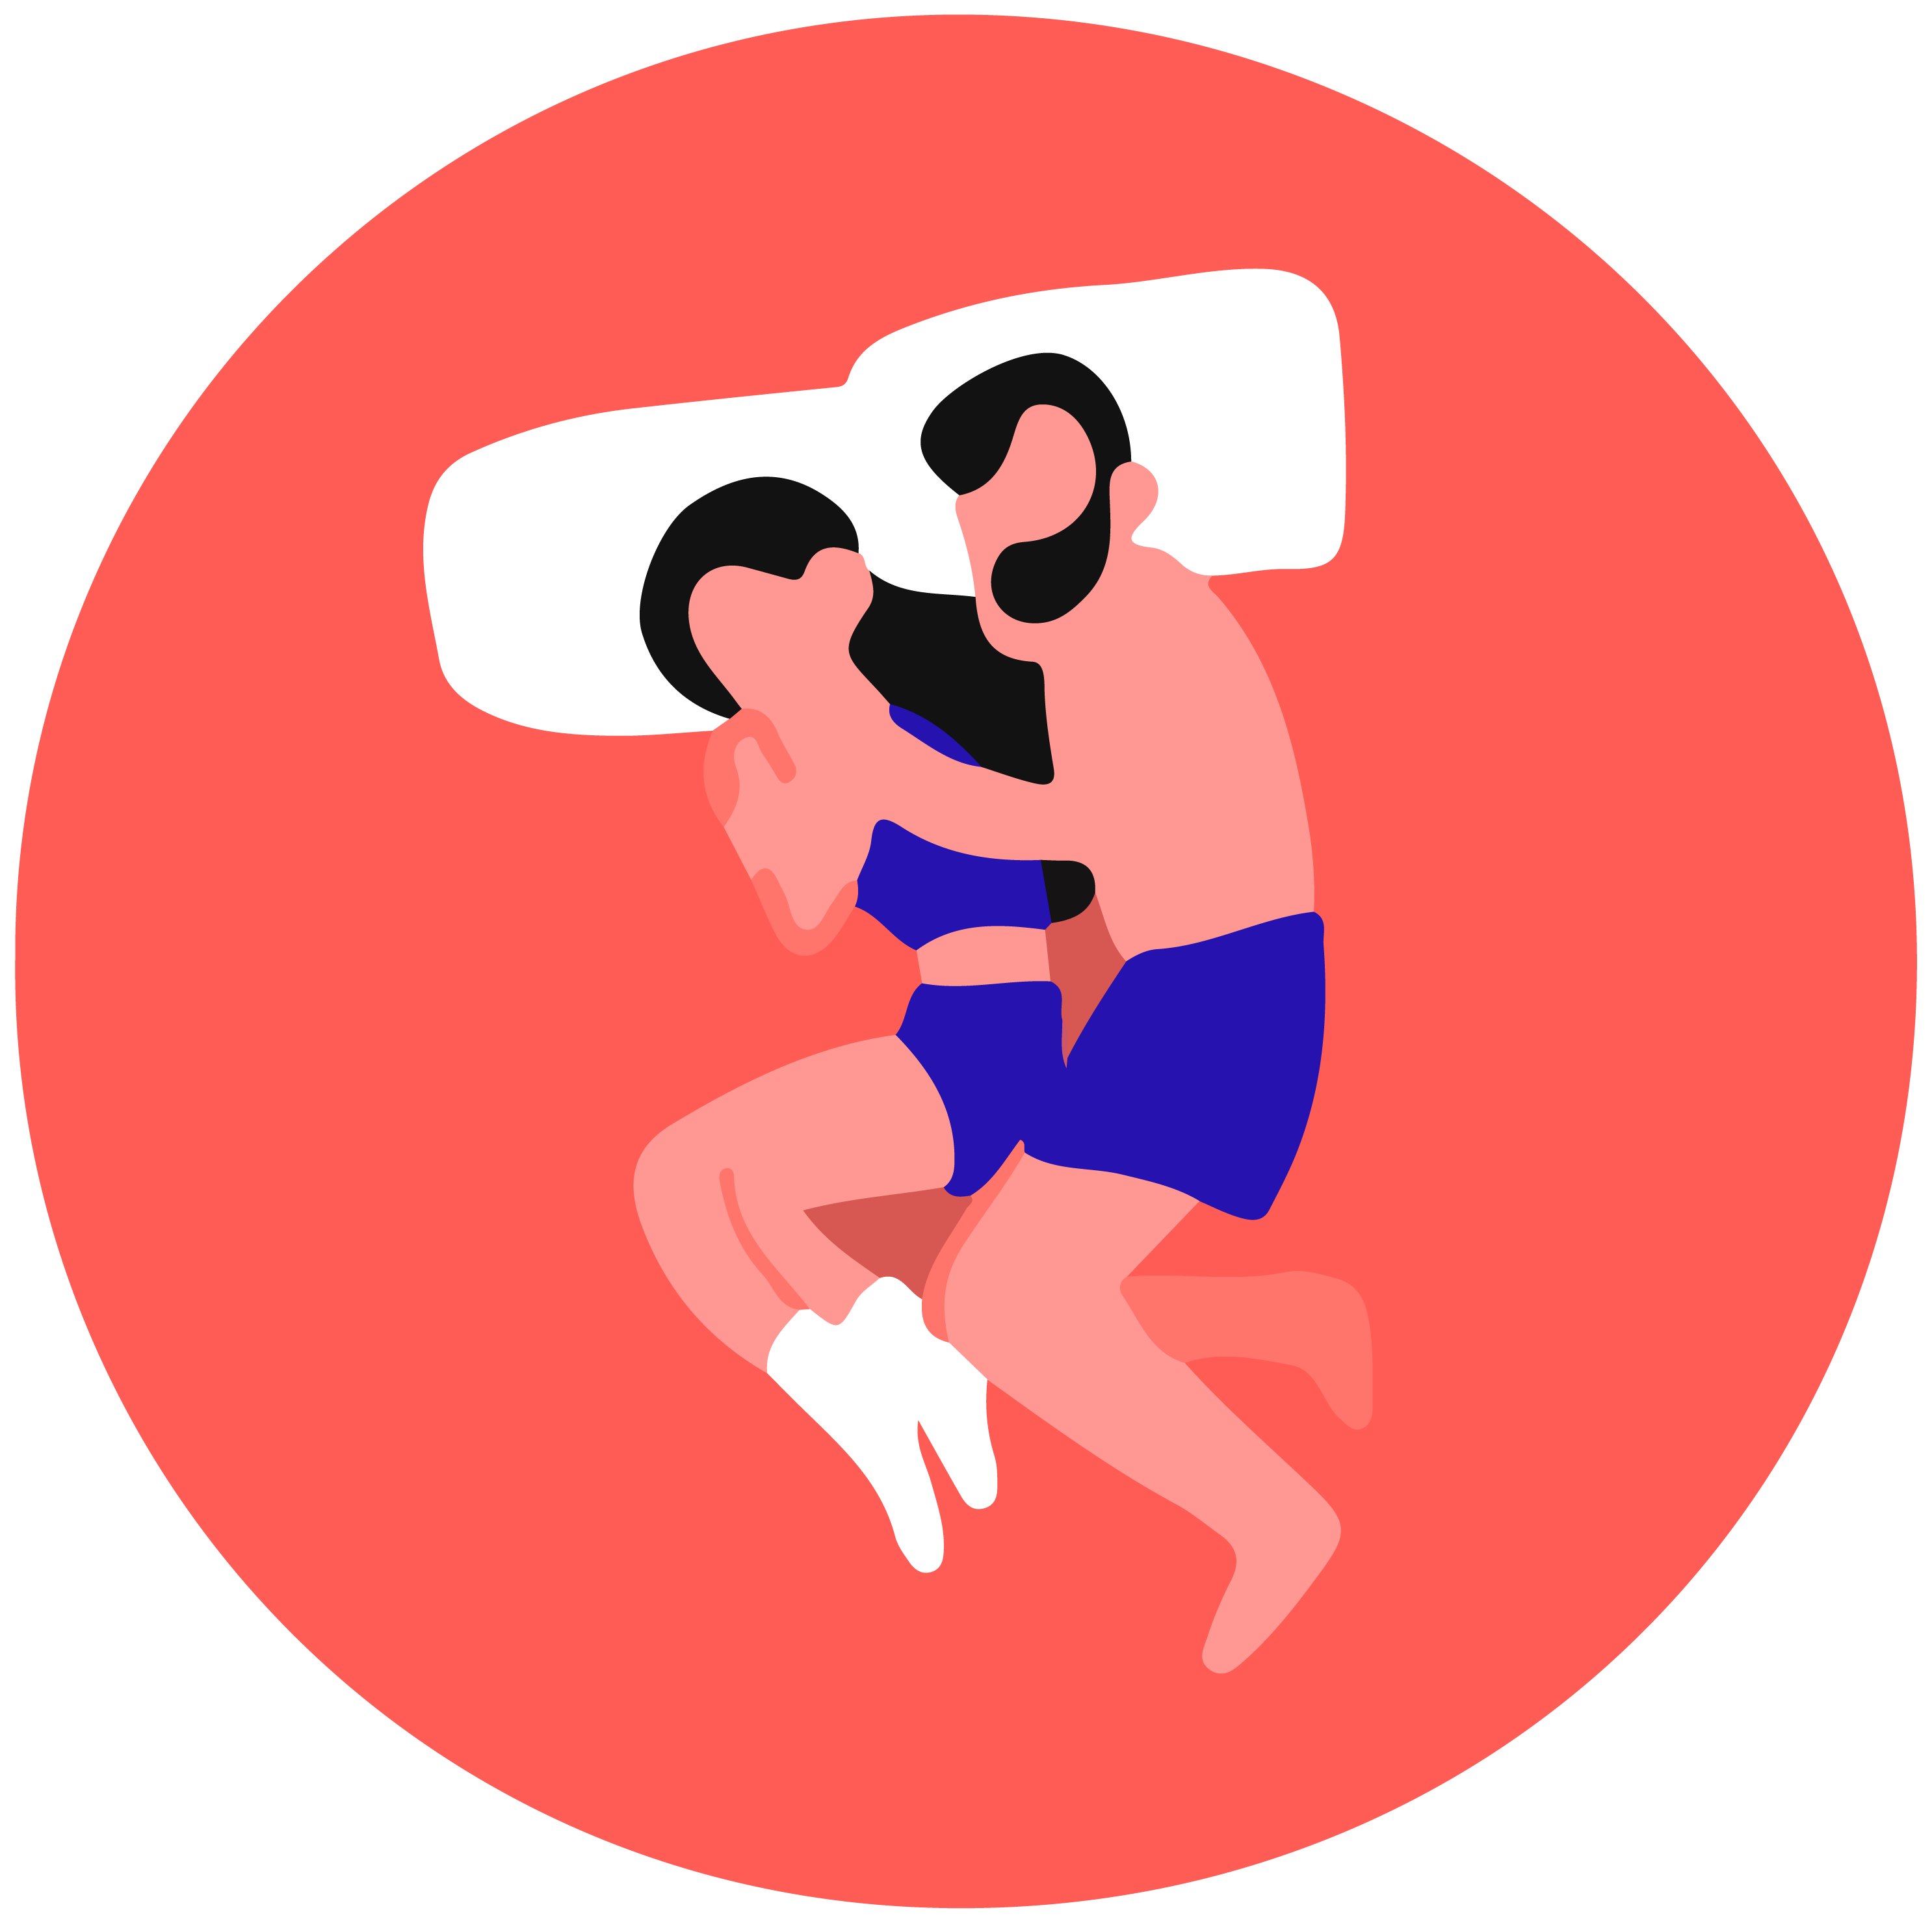 A couple sleeping on their sides, holding each other close in the spoon position.